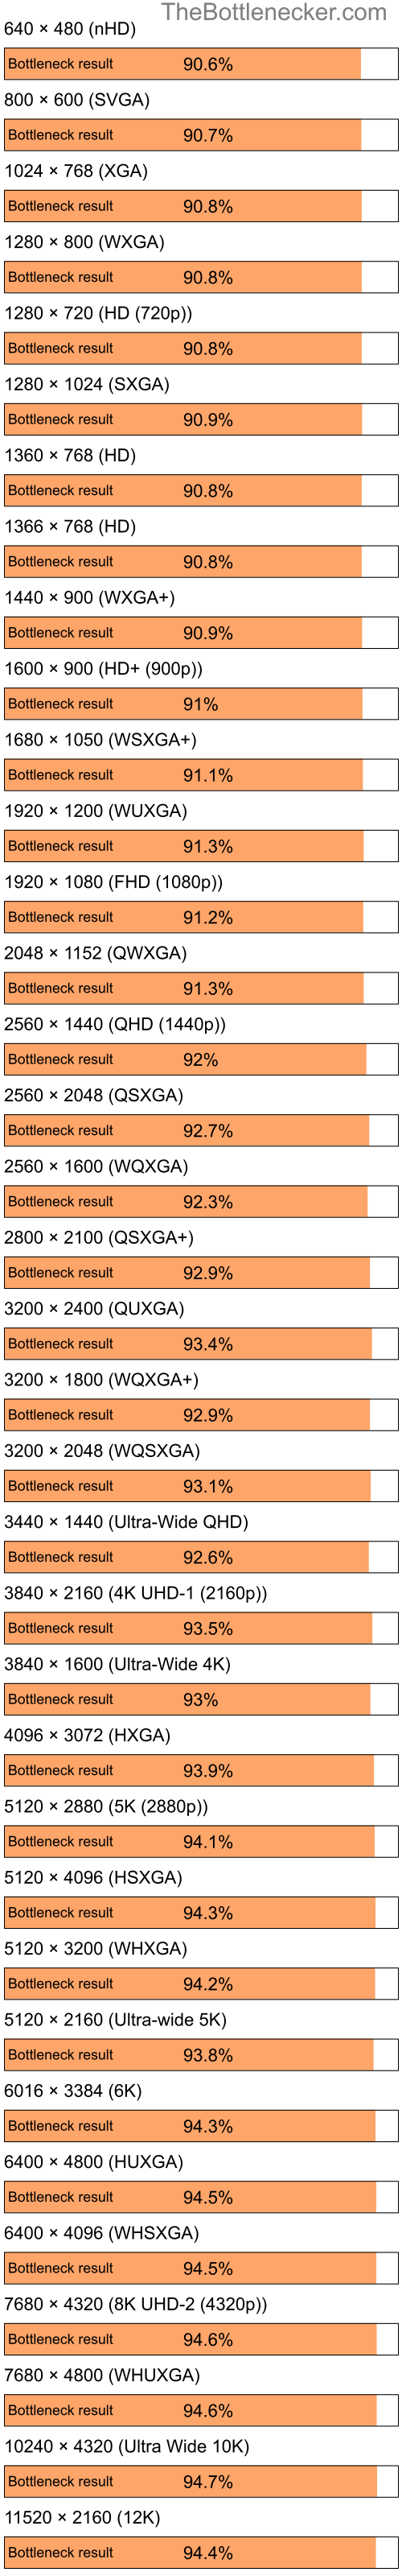 Bottleneck results by resolution for Intel Pentium 4 and NVIDIA GeForce4 420 Go 32M in Graphic Card Intense Tasks